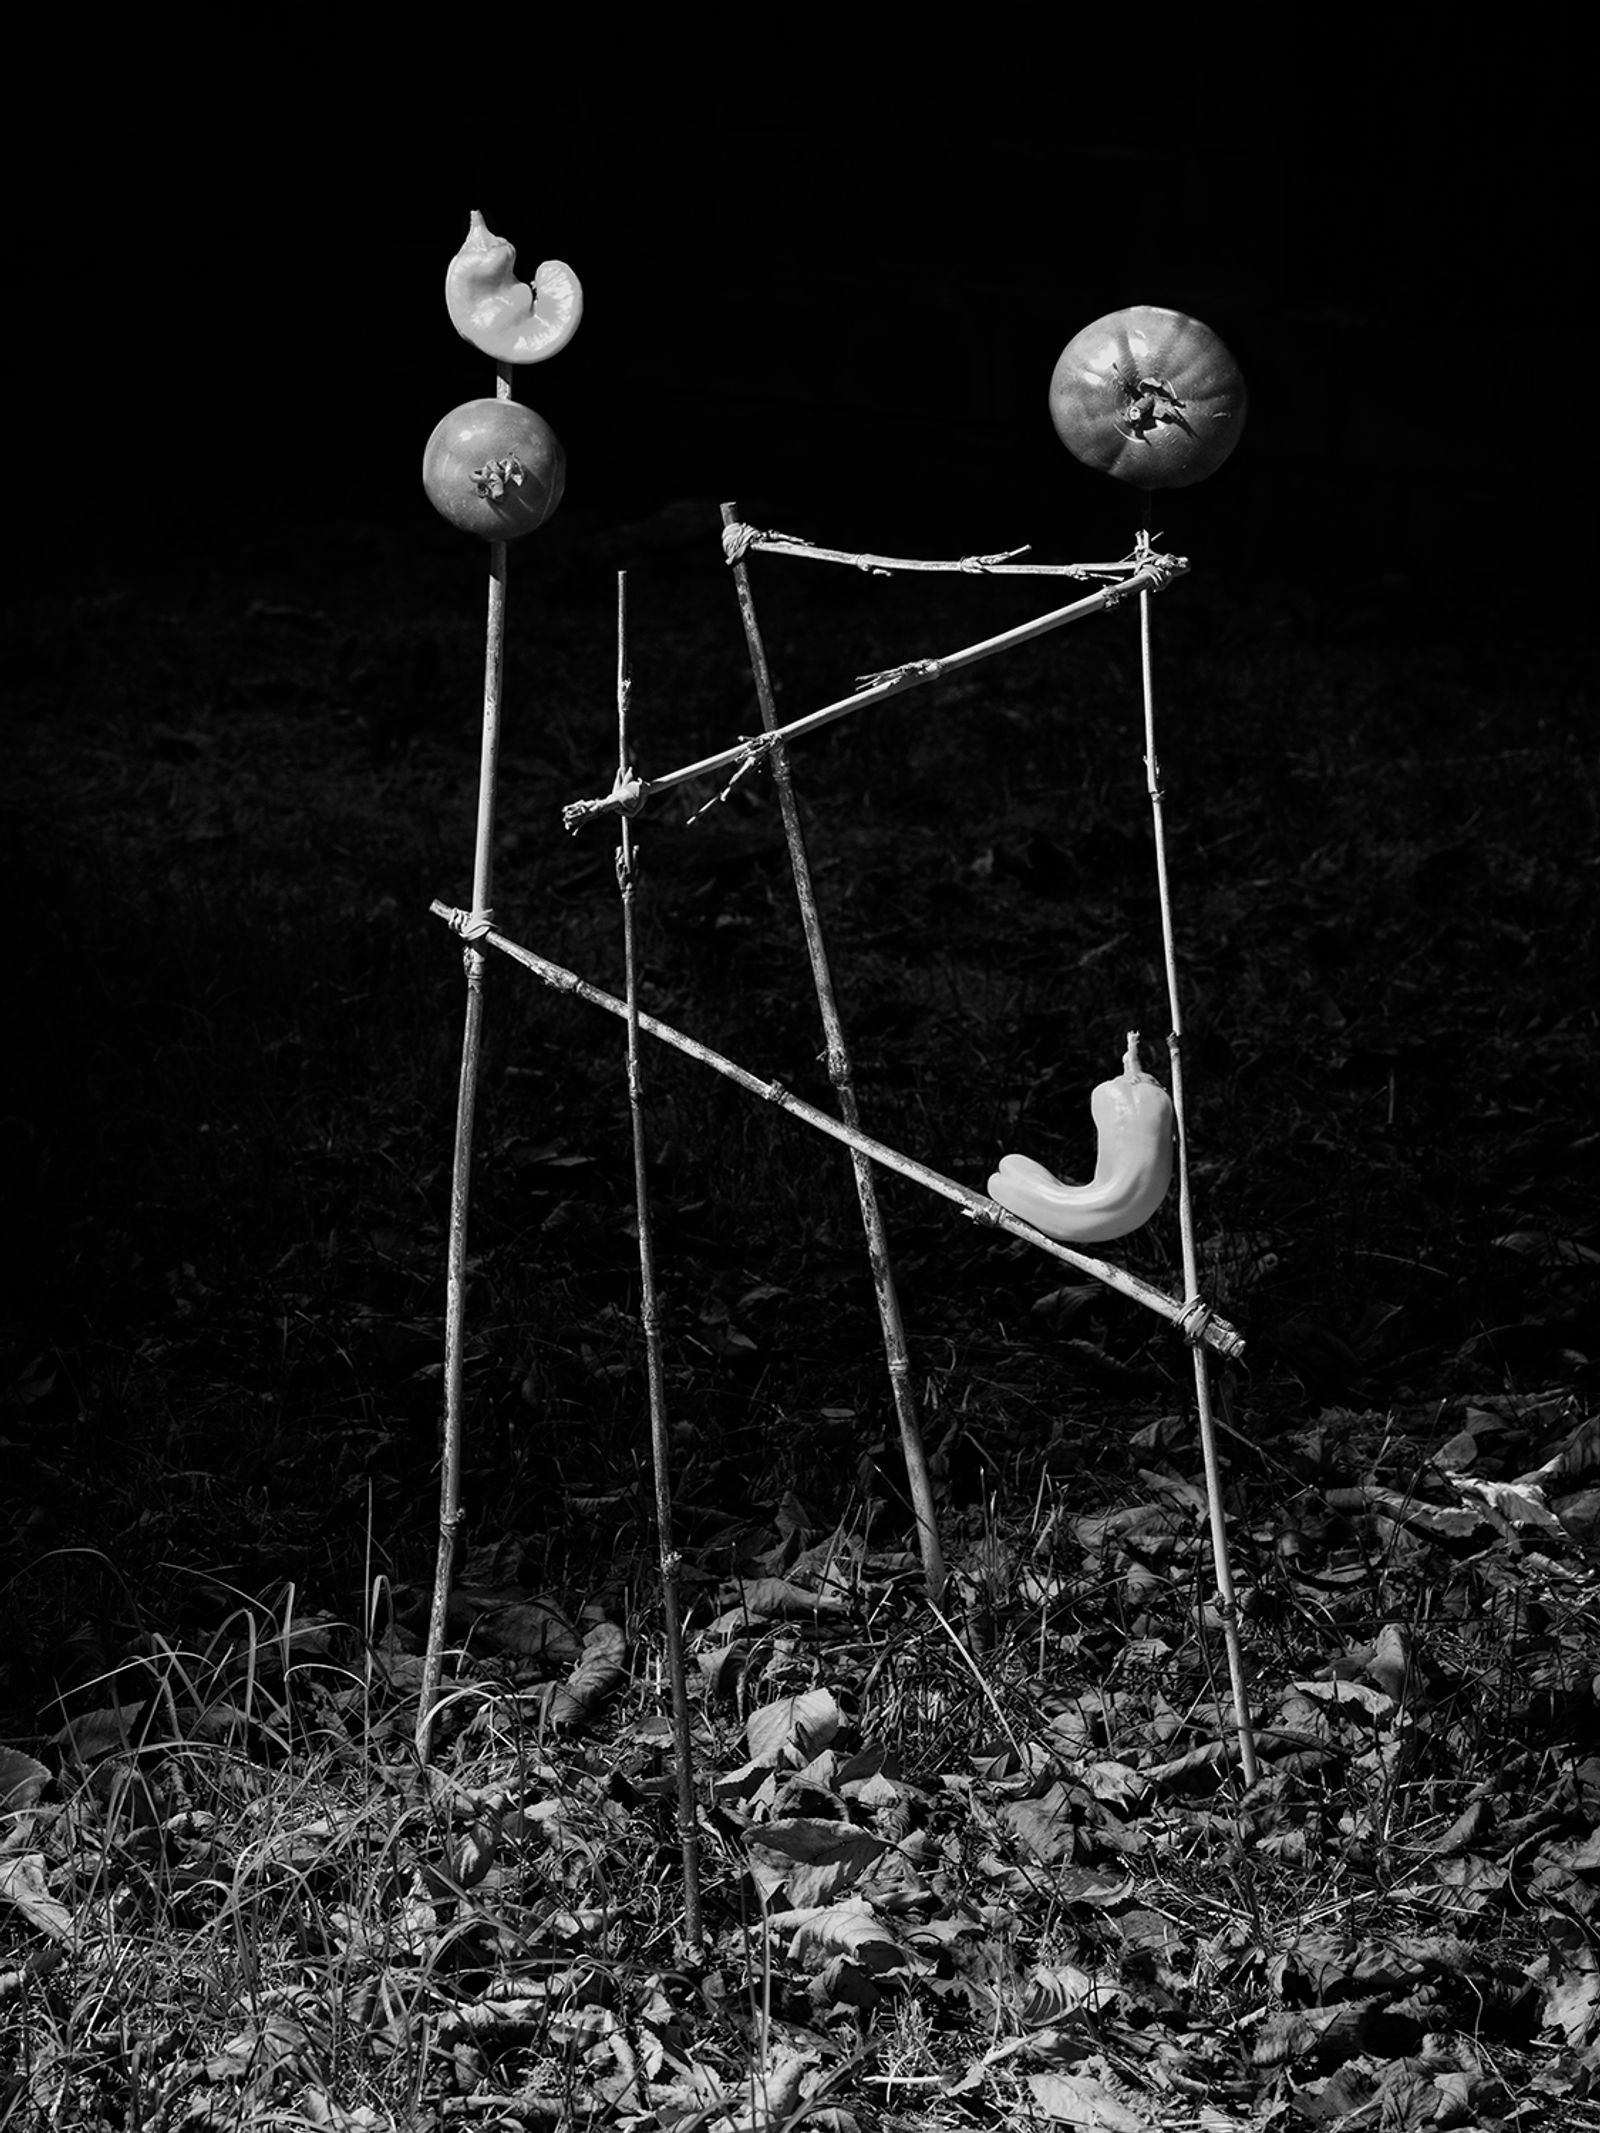 © Yurian Quintanas Nobel - Image from the The Ignorant Gardener photography project